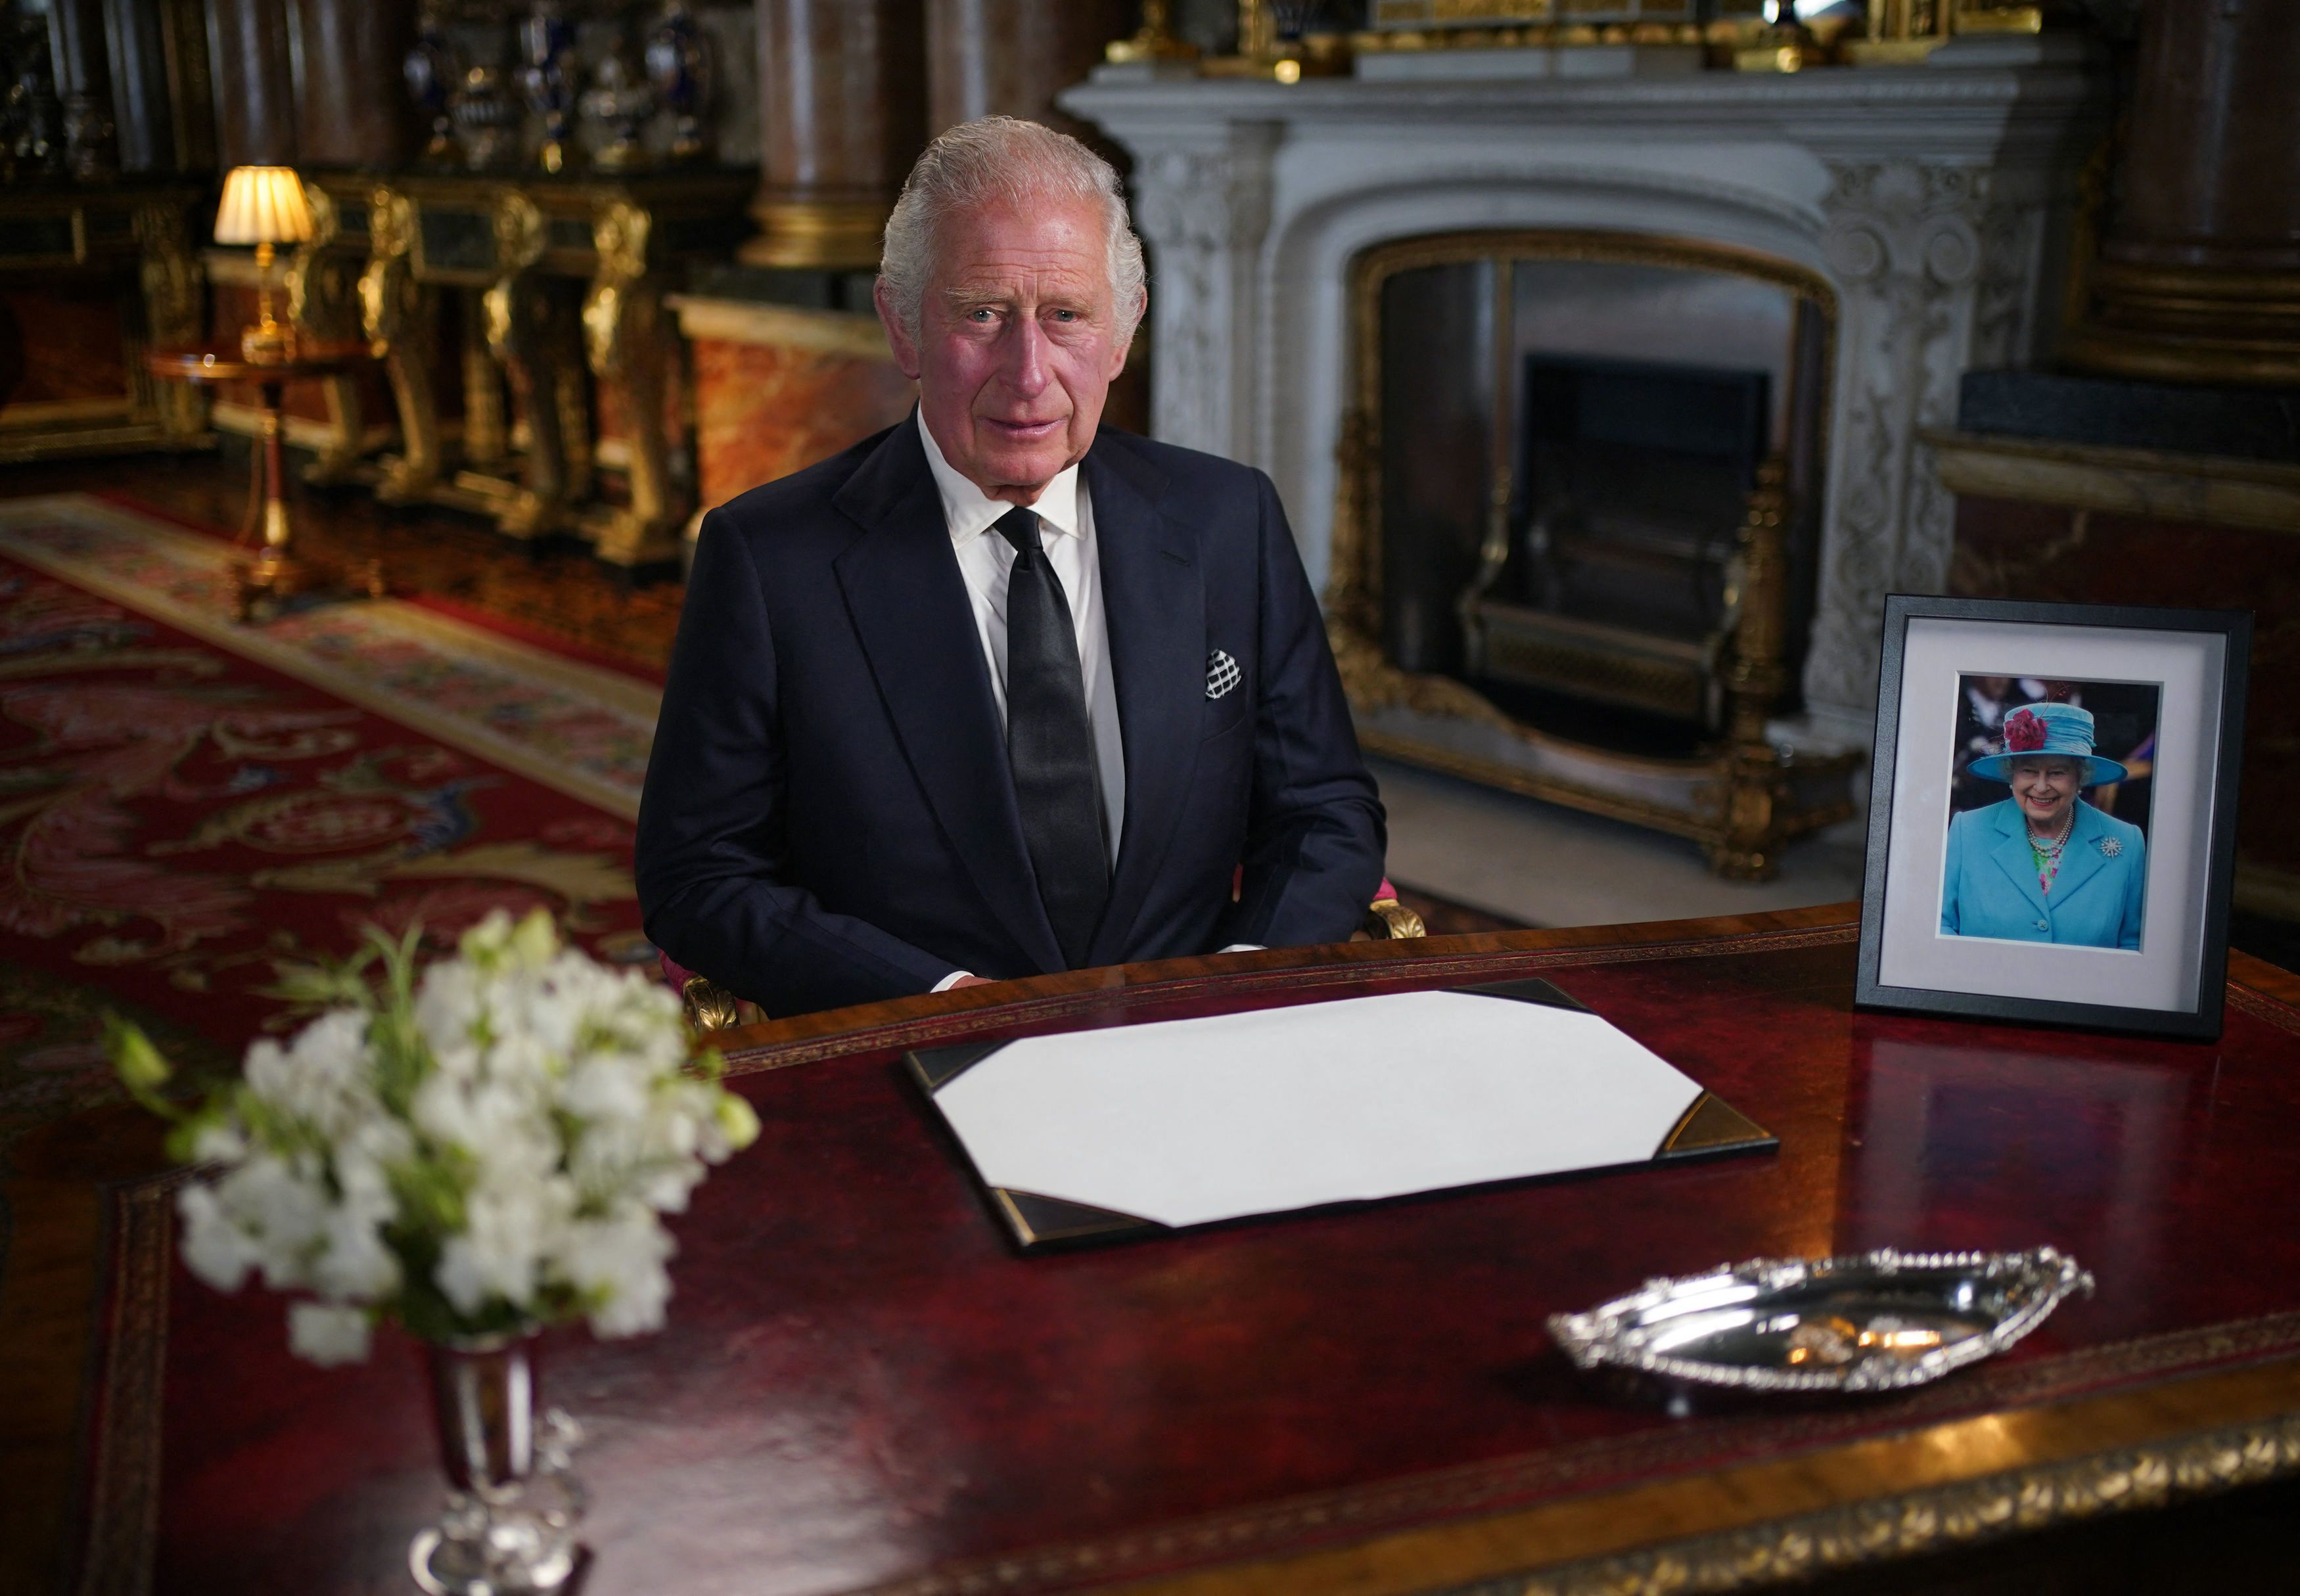 Britain's Charles III gives first King's Speech as monarch